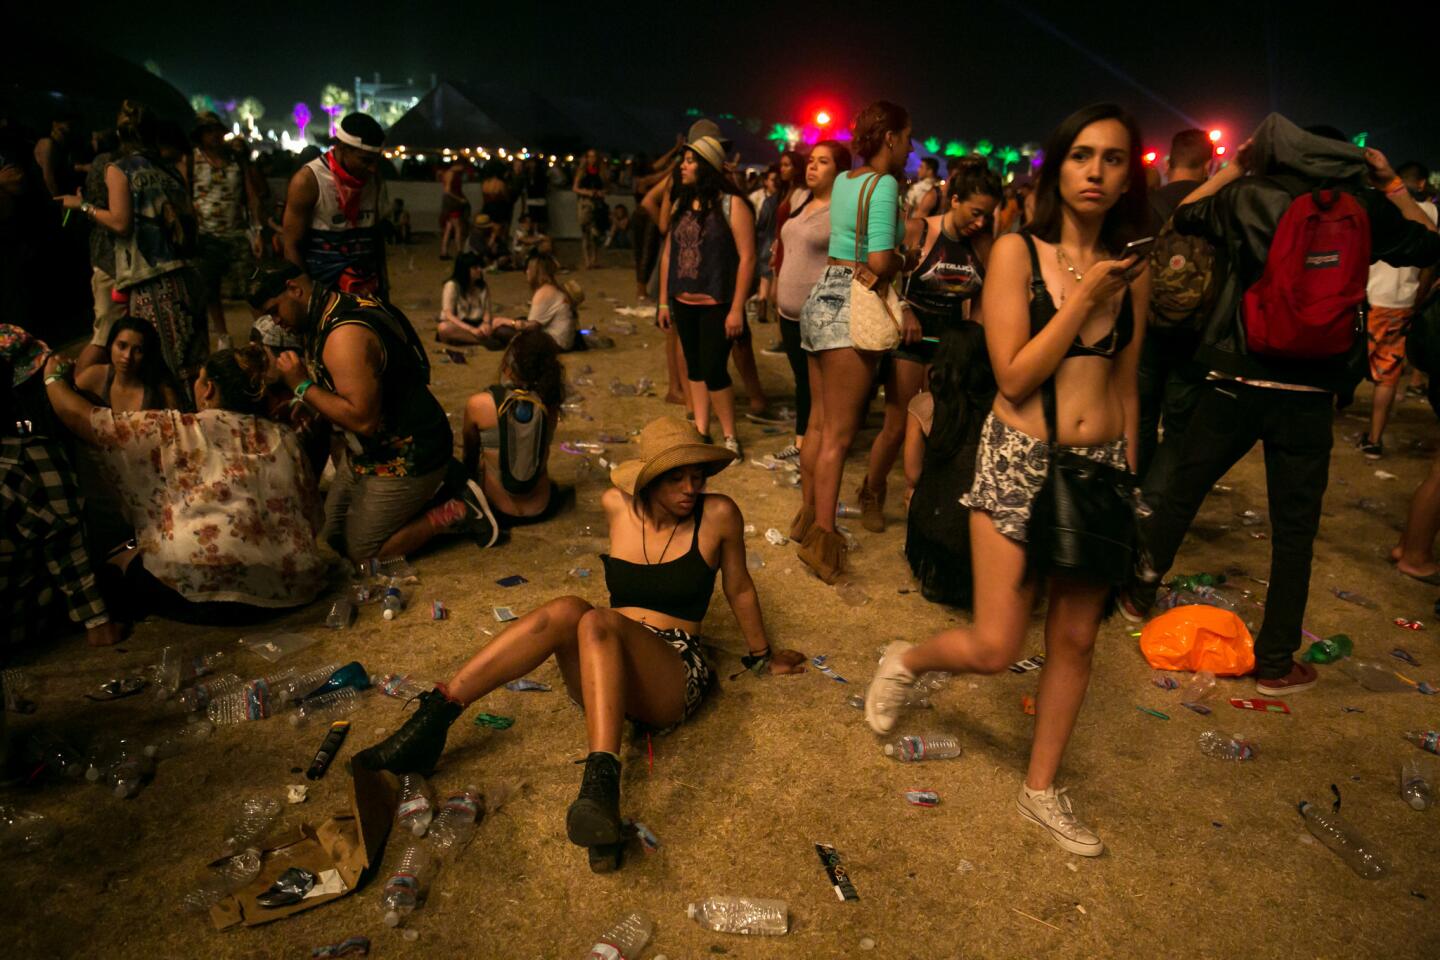 Music fans sit on the littered ground in disbelief at the abrupt ending to Drake's performance, 2015.